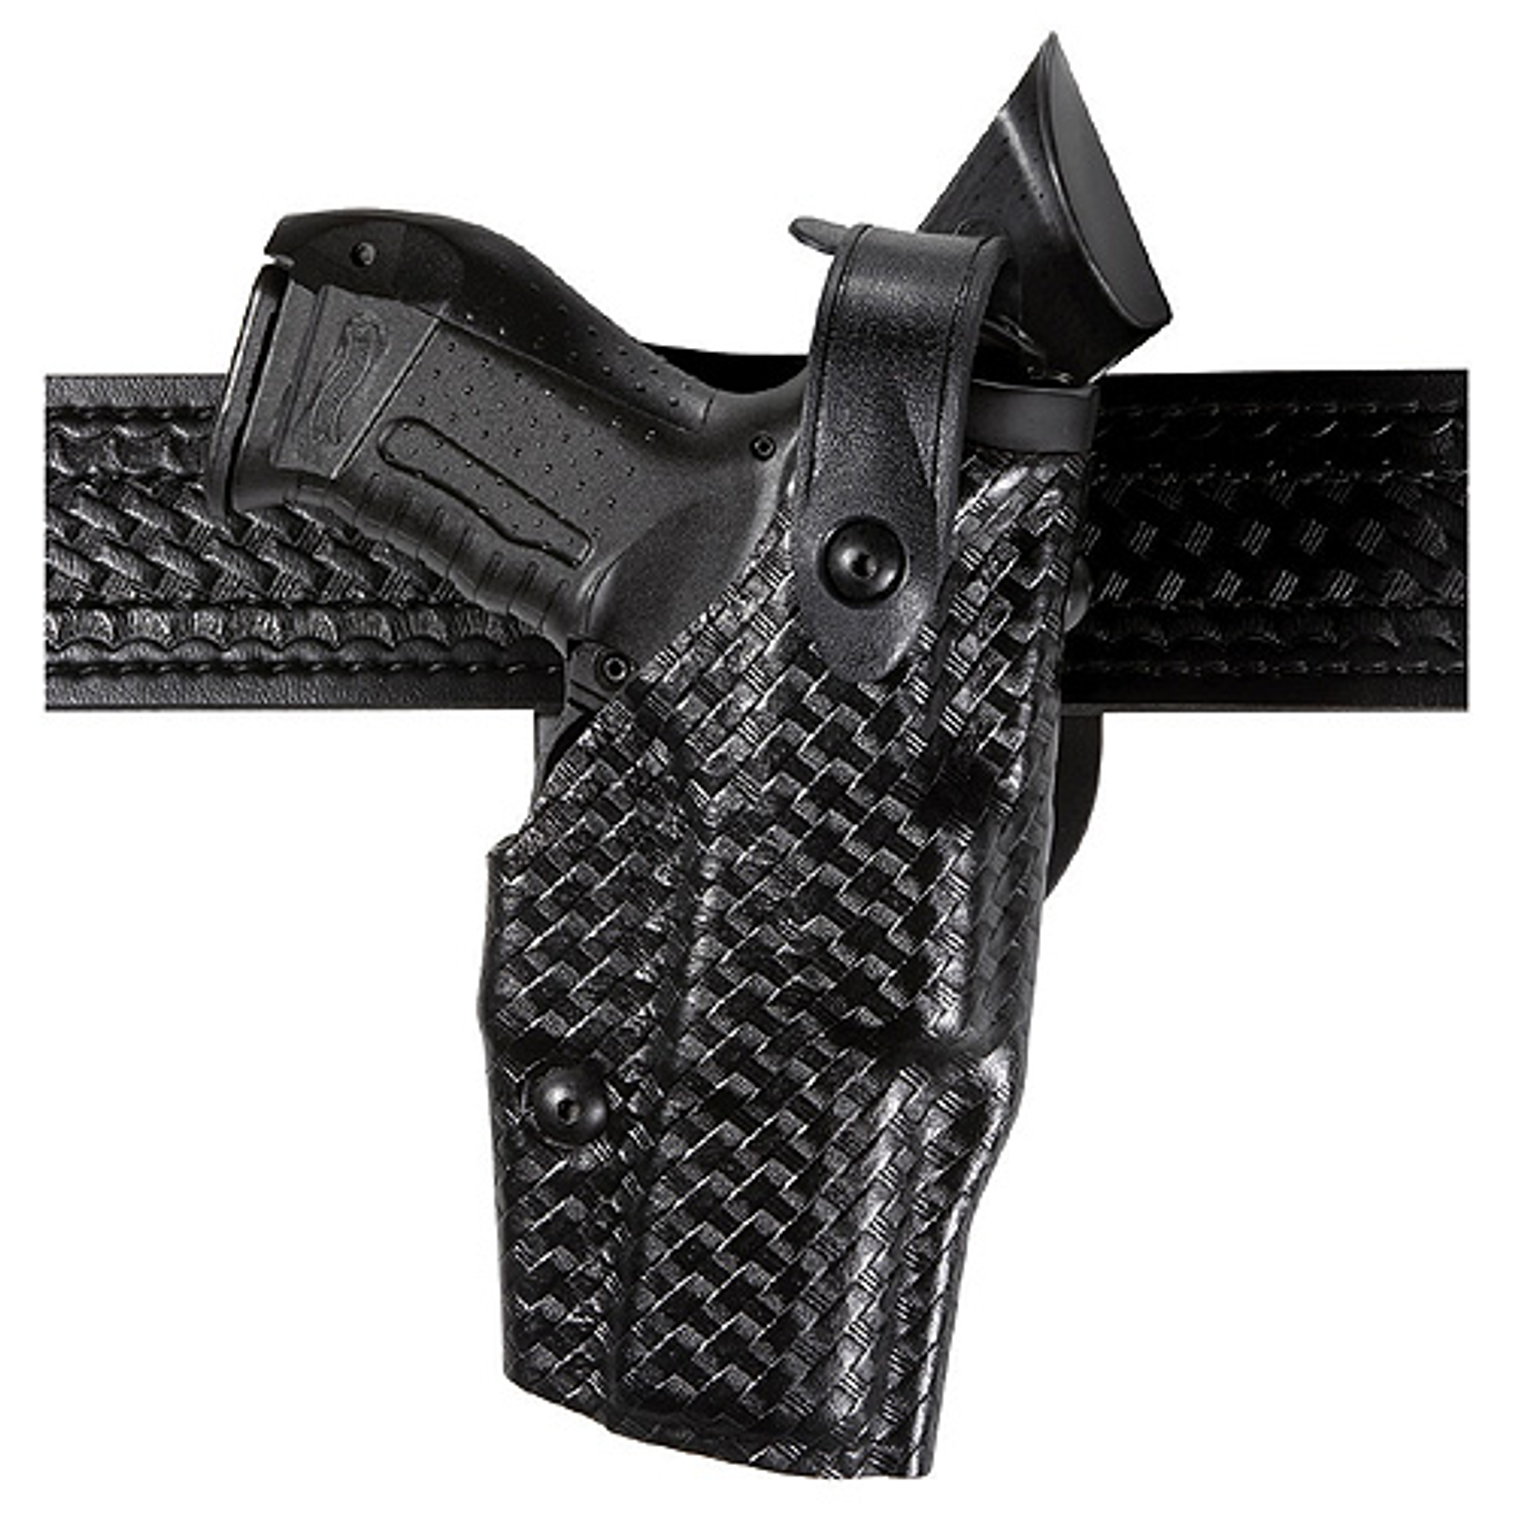 Model 6360 Als/sls Mid-ride, Level Iii Retention Duty Holster For Colt Government 1911